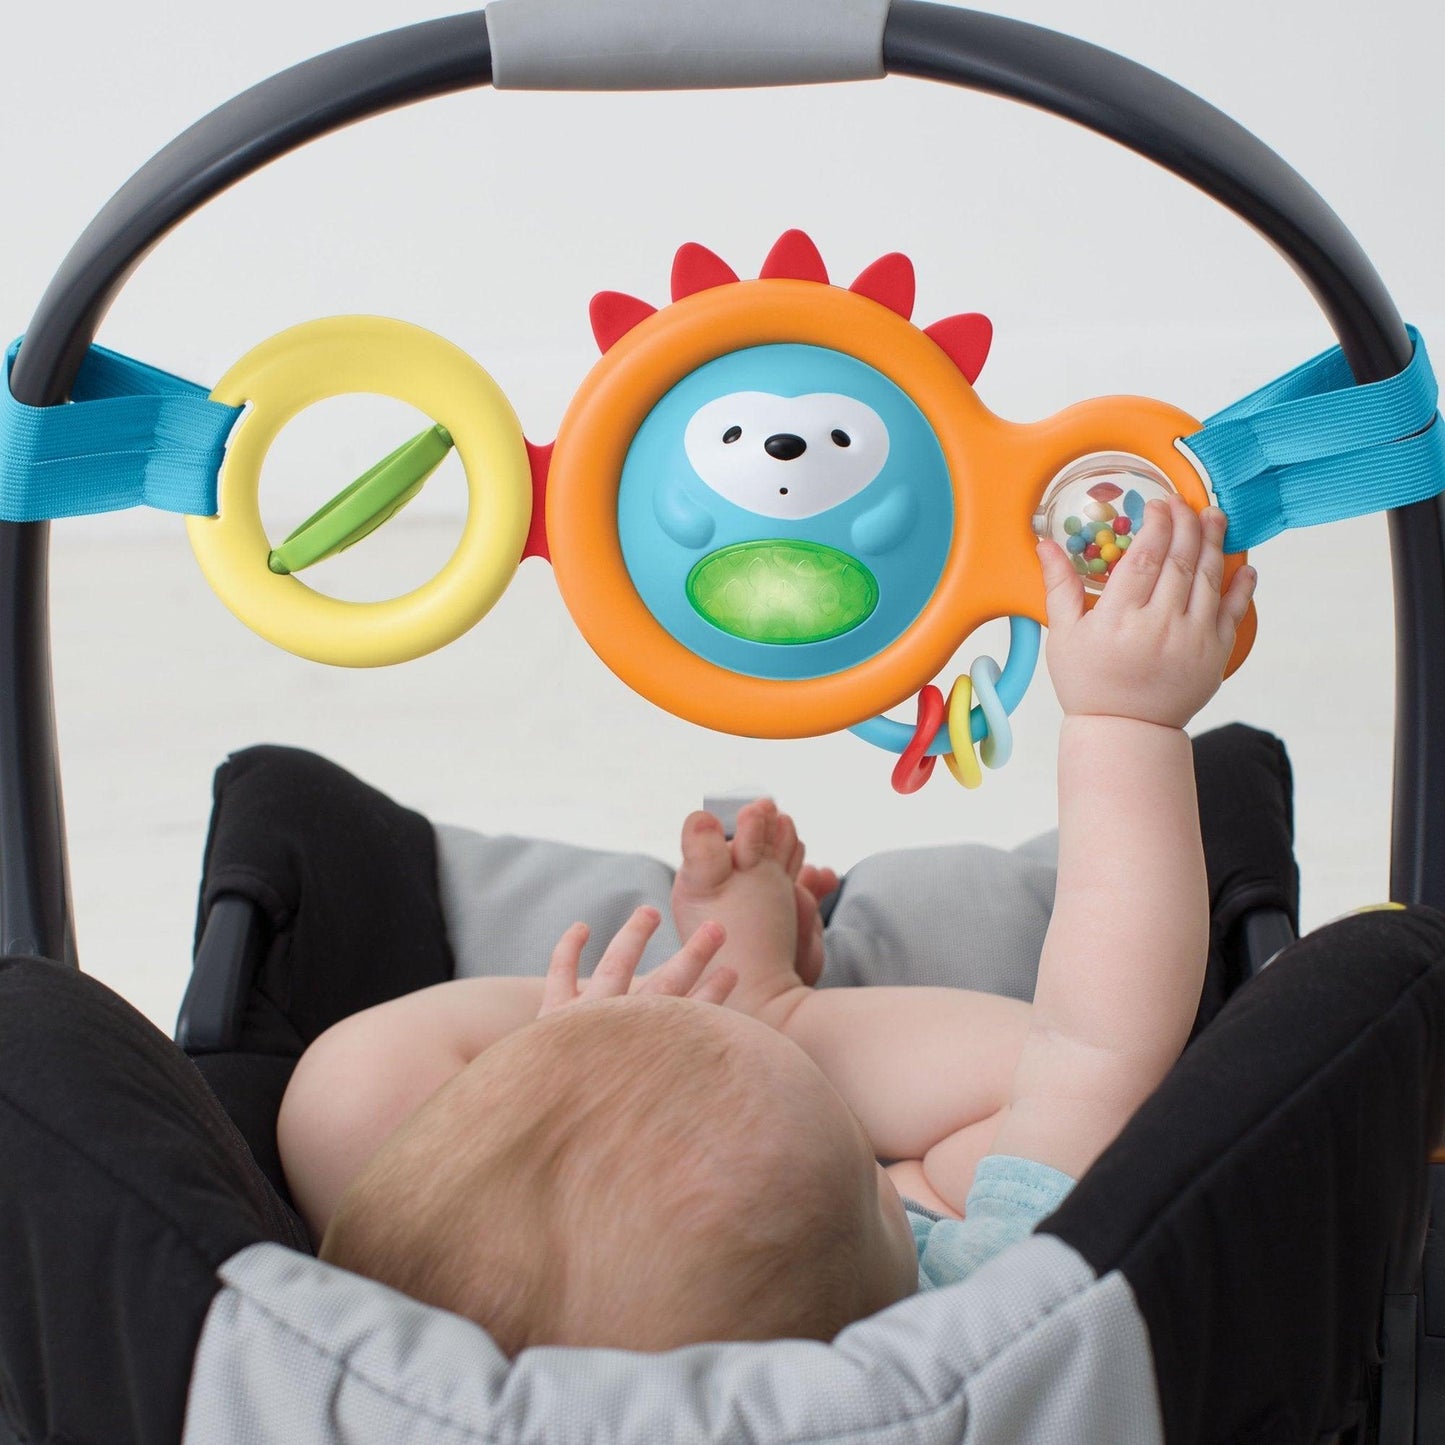 Get trendy with Carrier Toy Bar Pour Poussette - Skip Hop - Jouets available at BABY PREMA. Grab yours for €17.90 today!